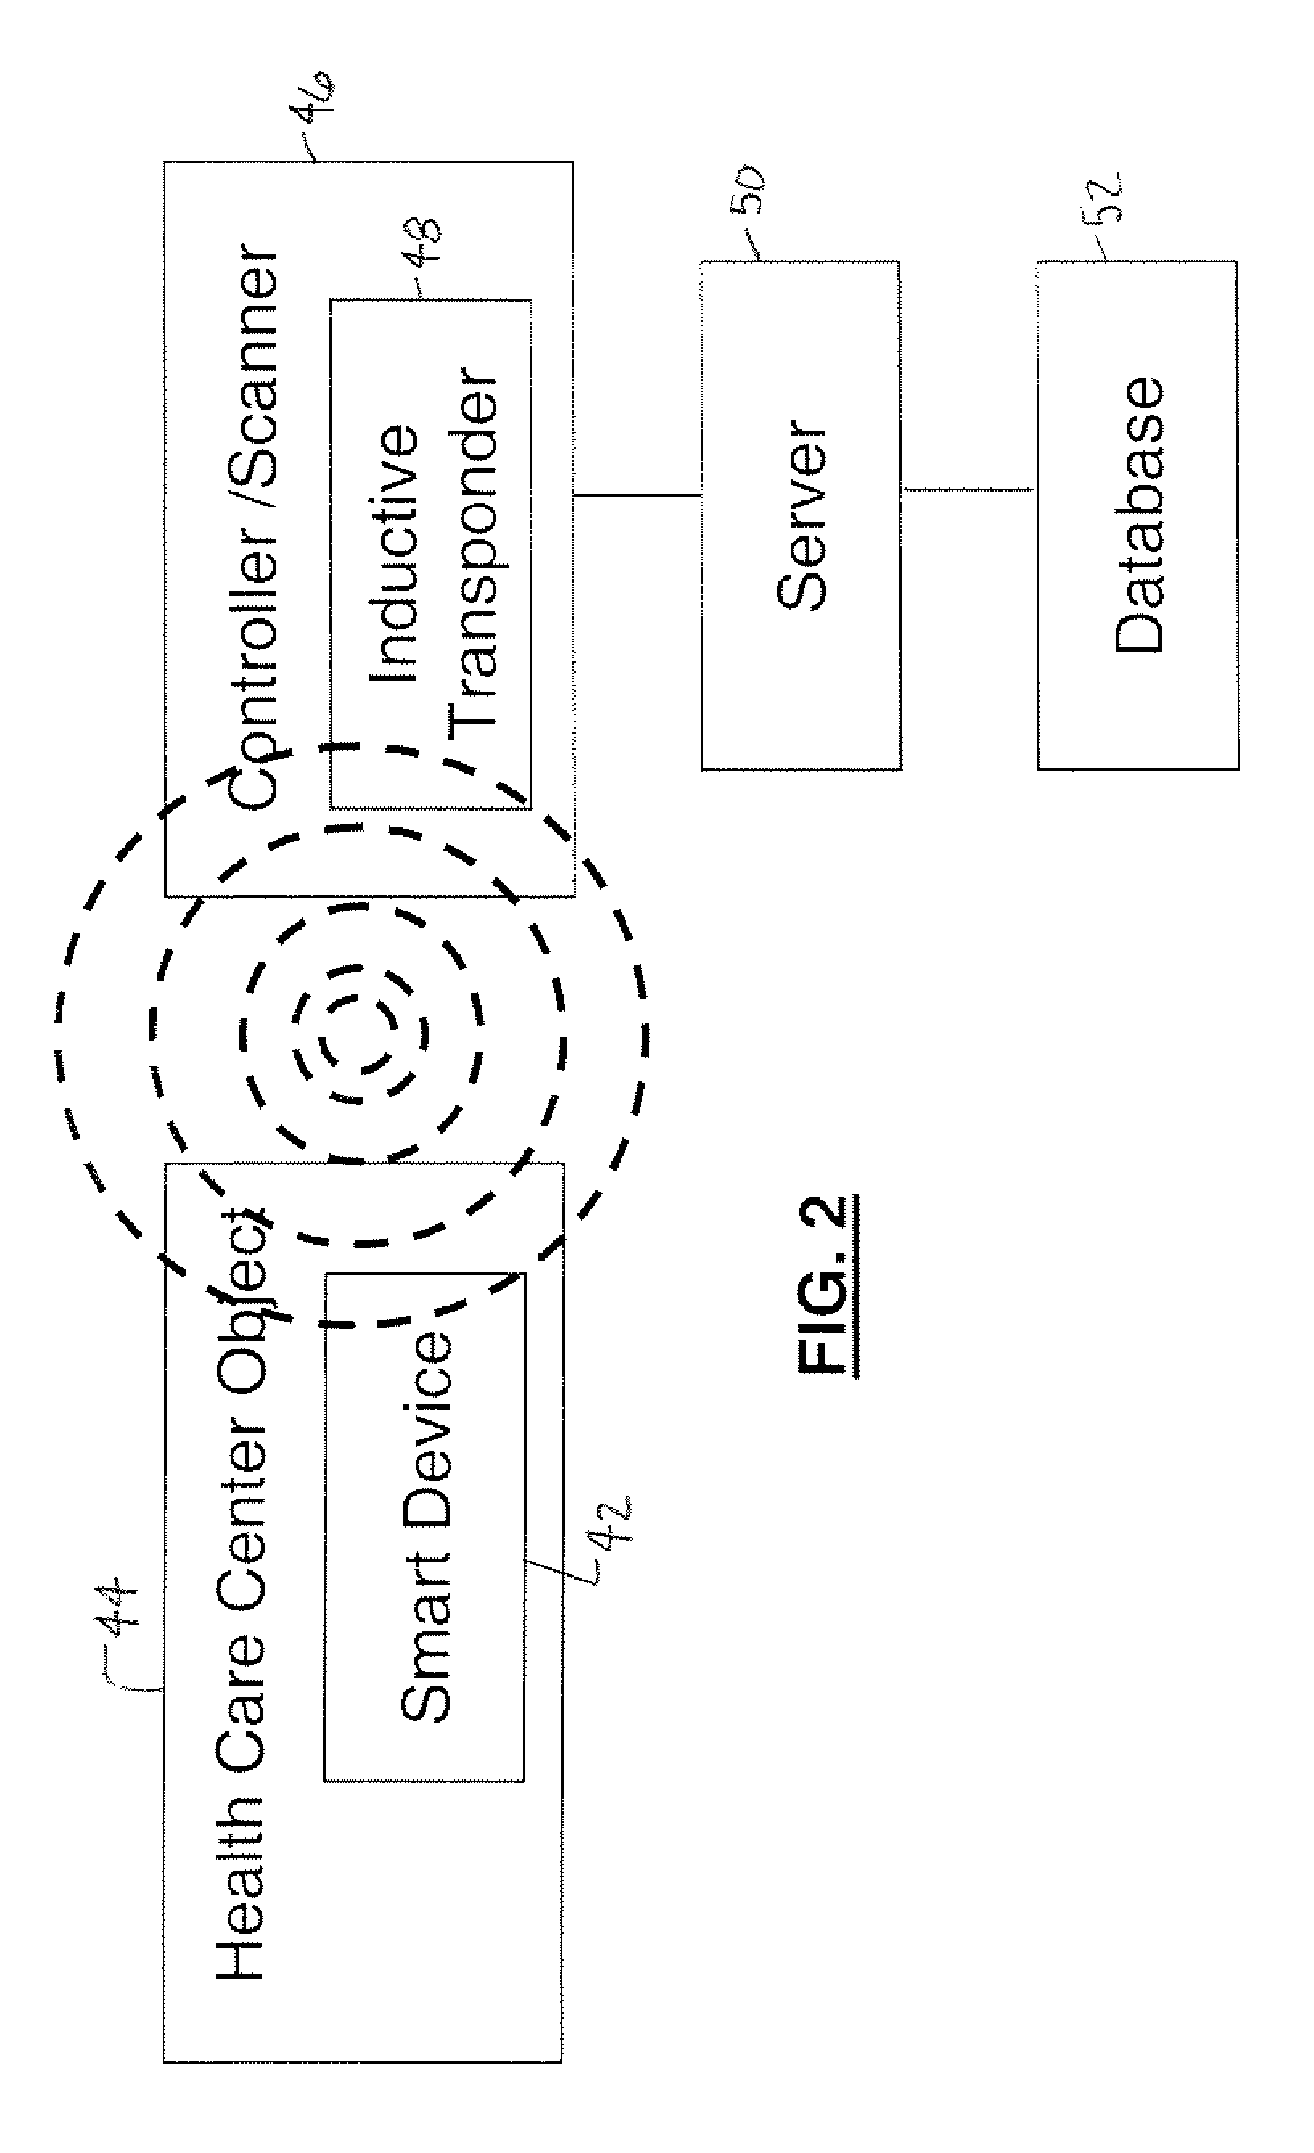 Health care operating system with radio frequency information transfer